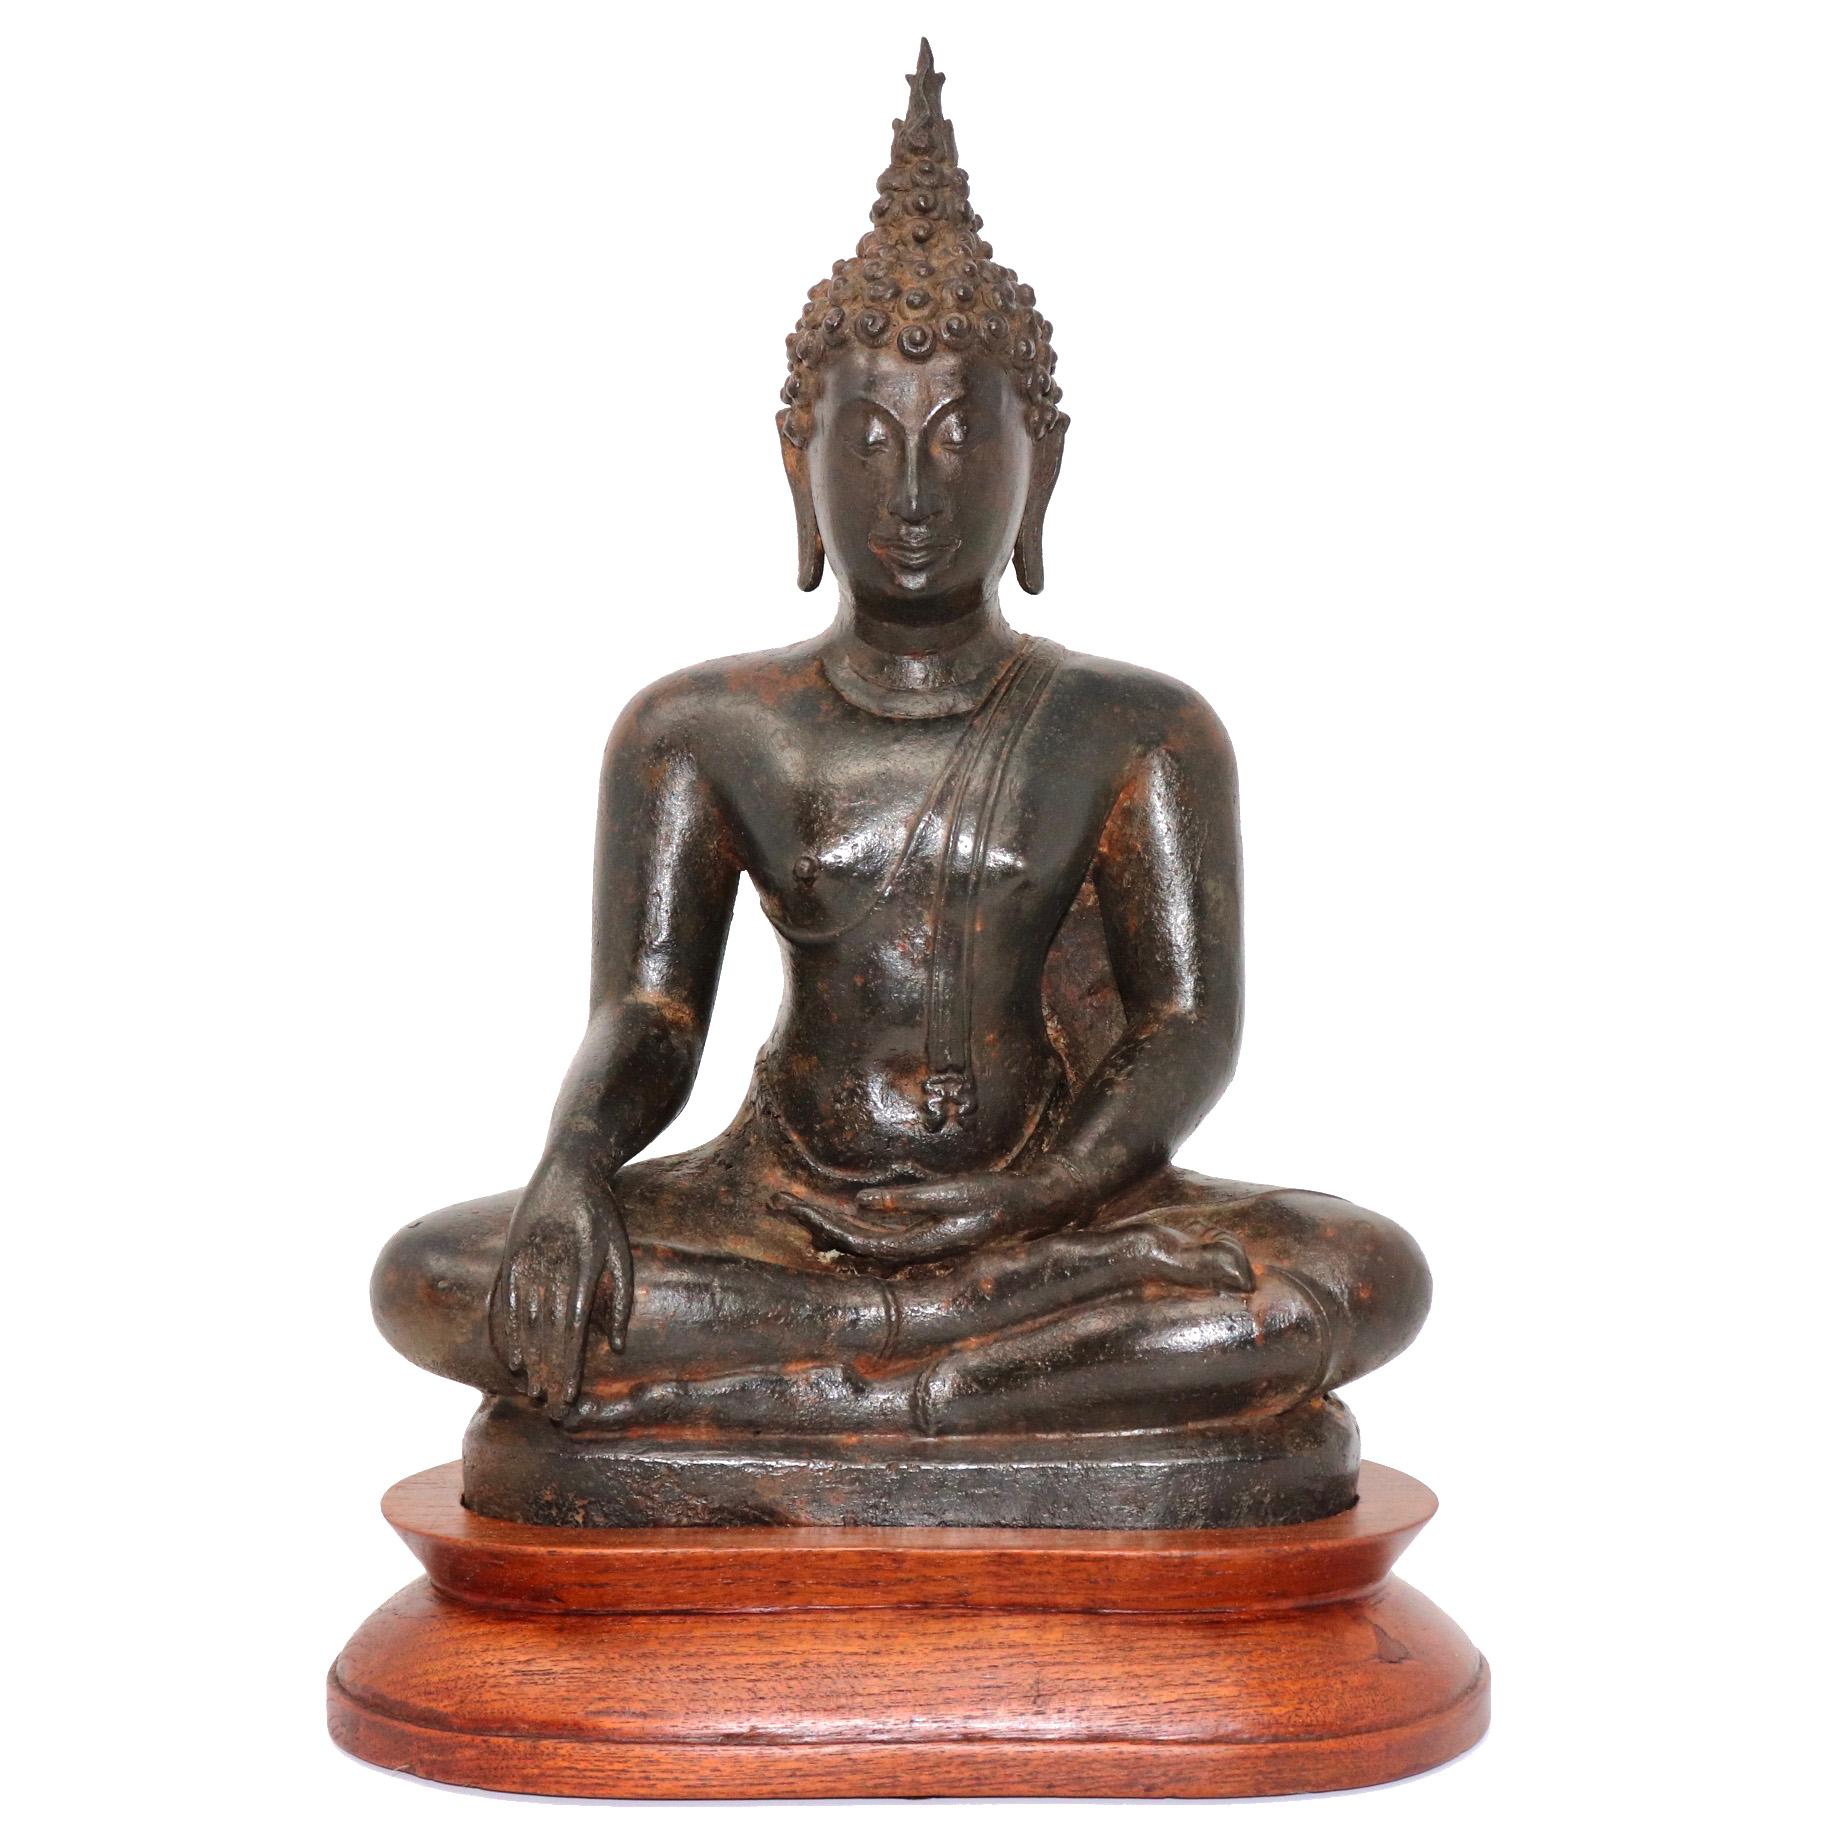 Antique bronze Figure of Maravijaya Buddha, Thailand, Lan Na, Sukhothai post-classic style, 14th-15th century.
Gracefully seated with legs folded in the hero pose exposing the sole of his well modeled right foot resting in the crook of his left leg